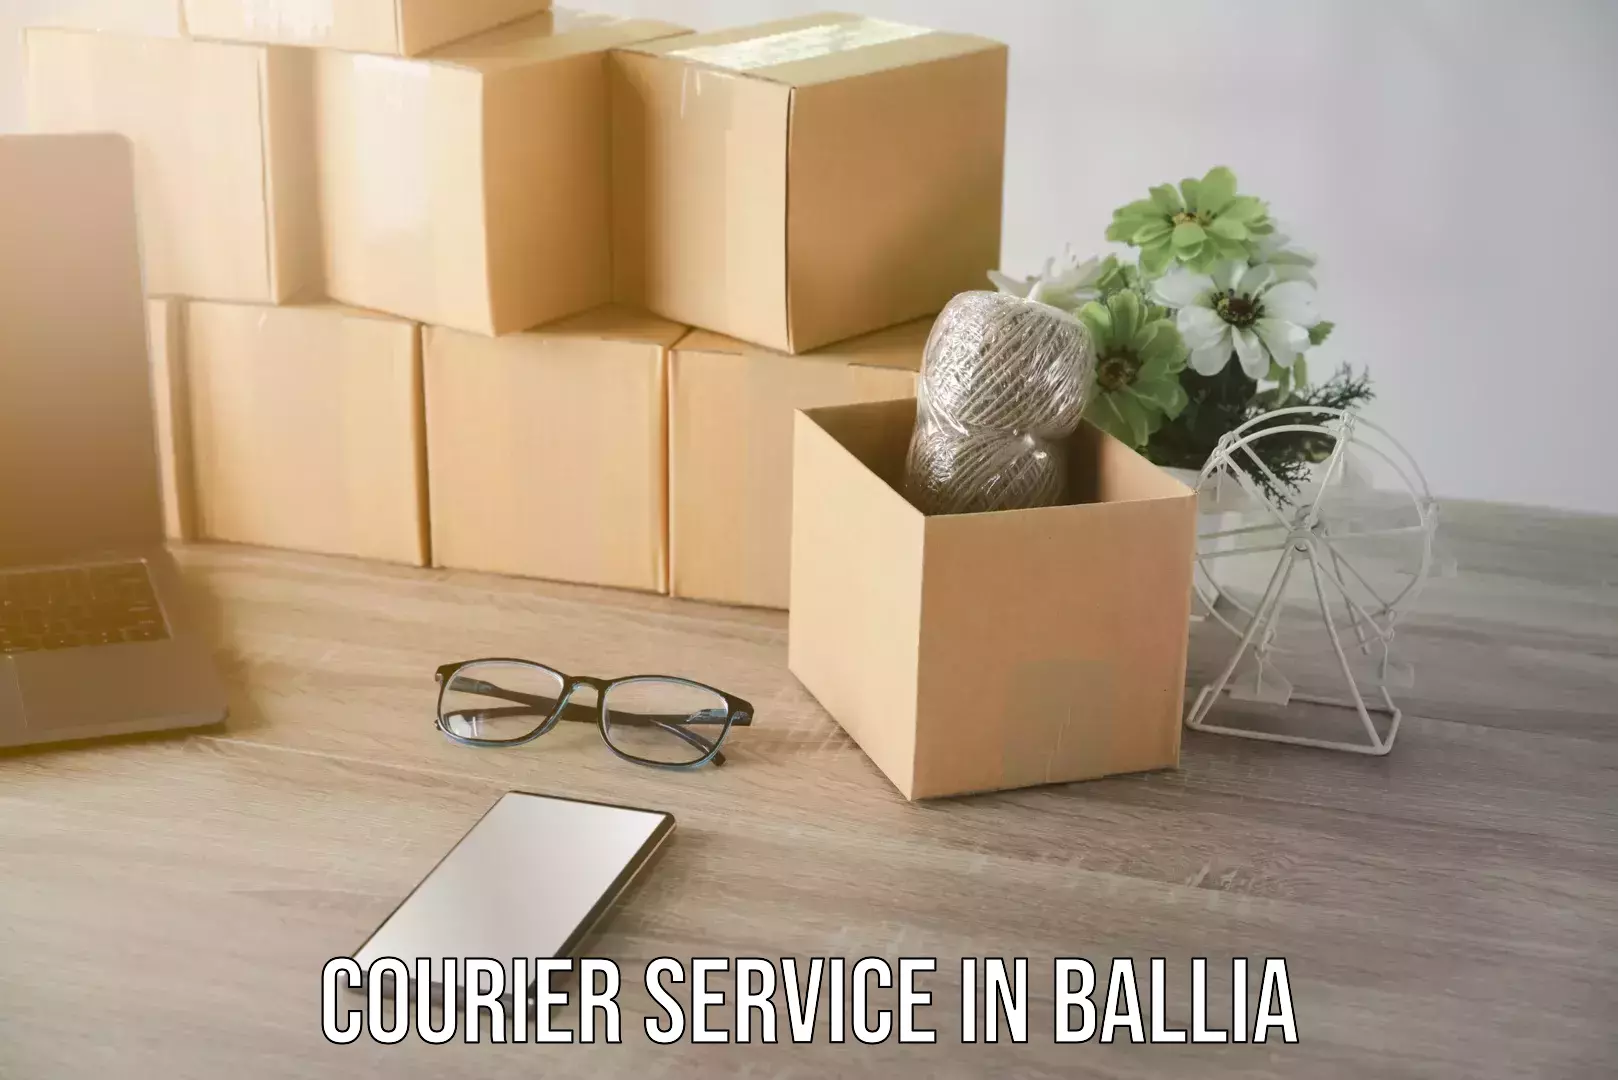 Track and trace shipping in Ballia